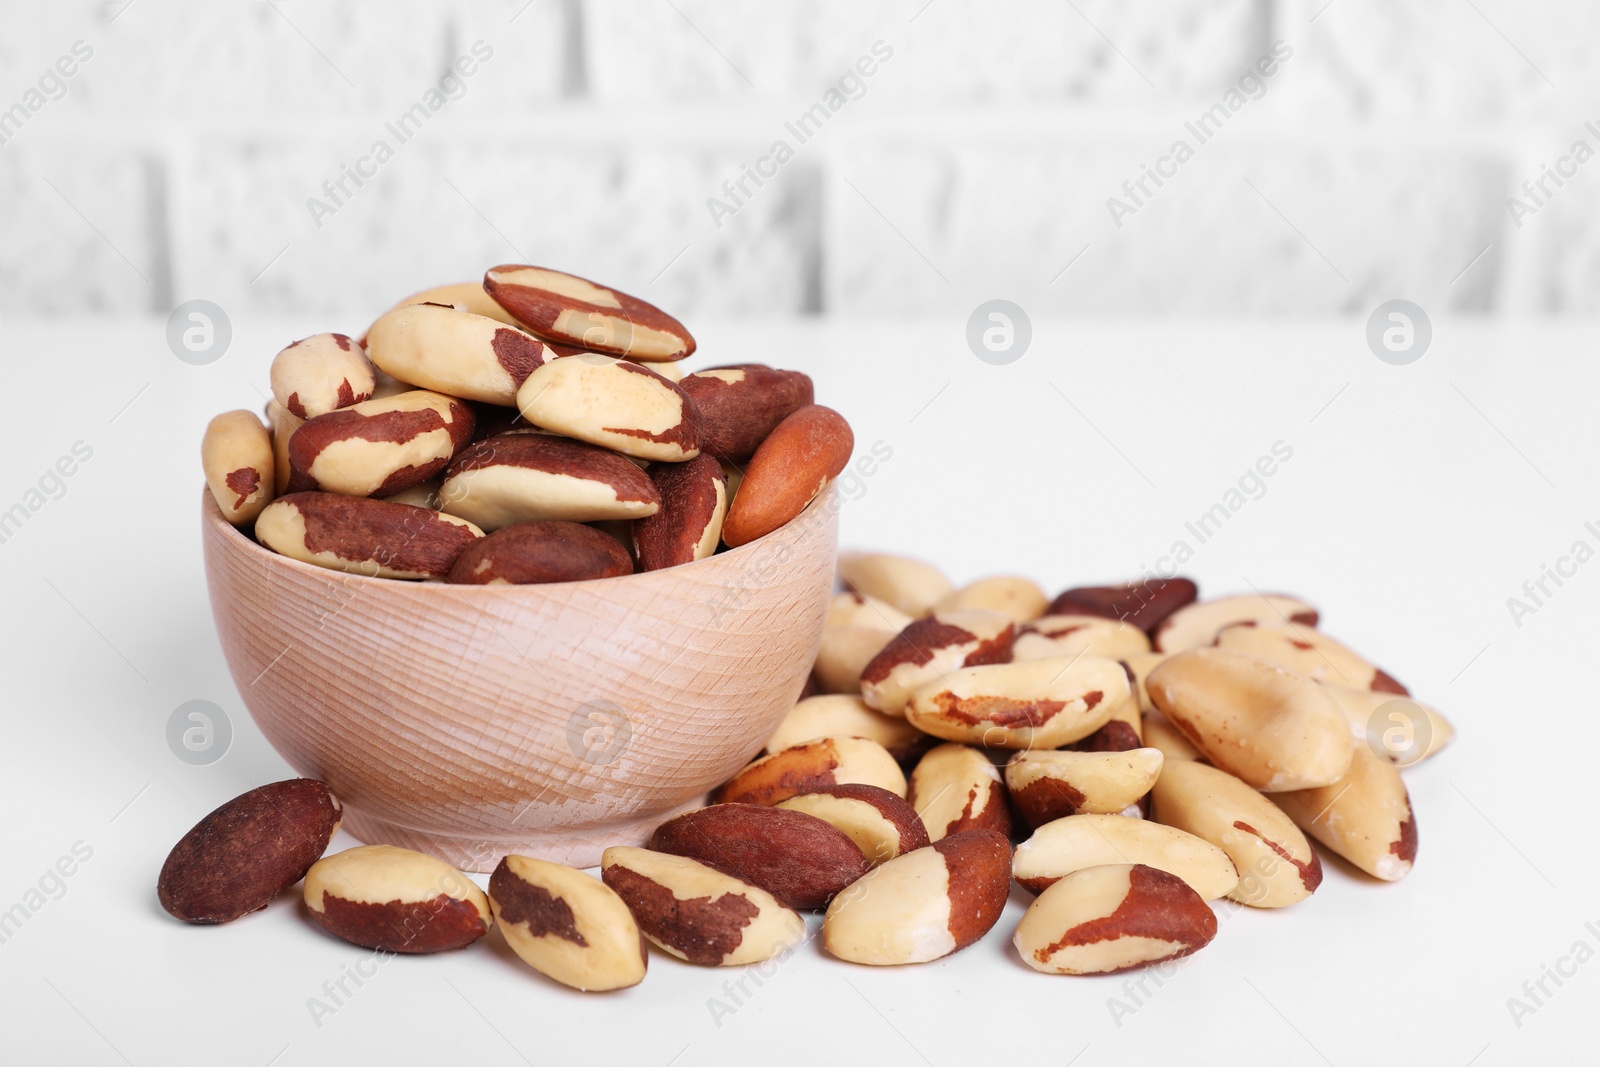 Photo of Tasty Brazil nuts on white table against brick wall